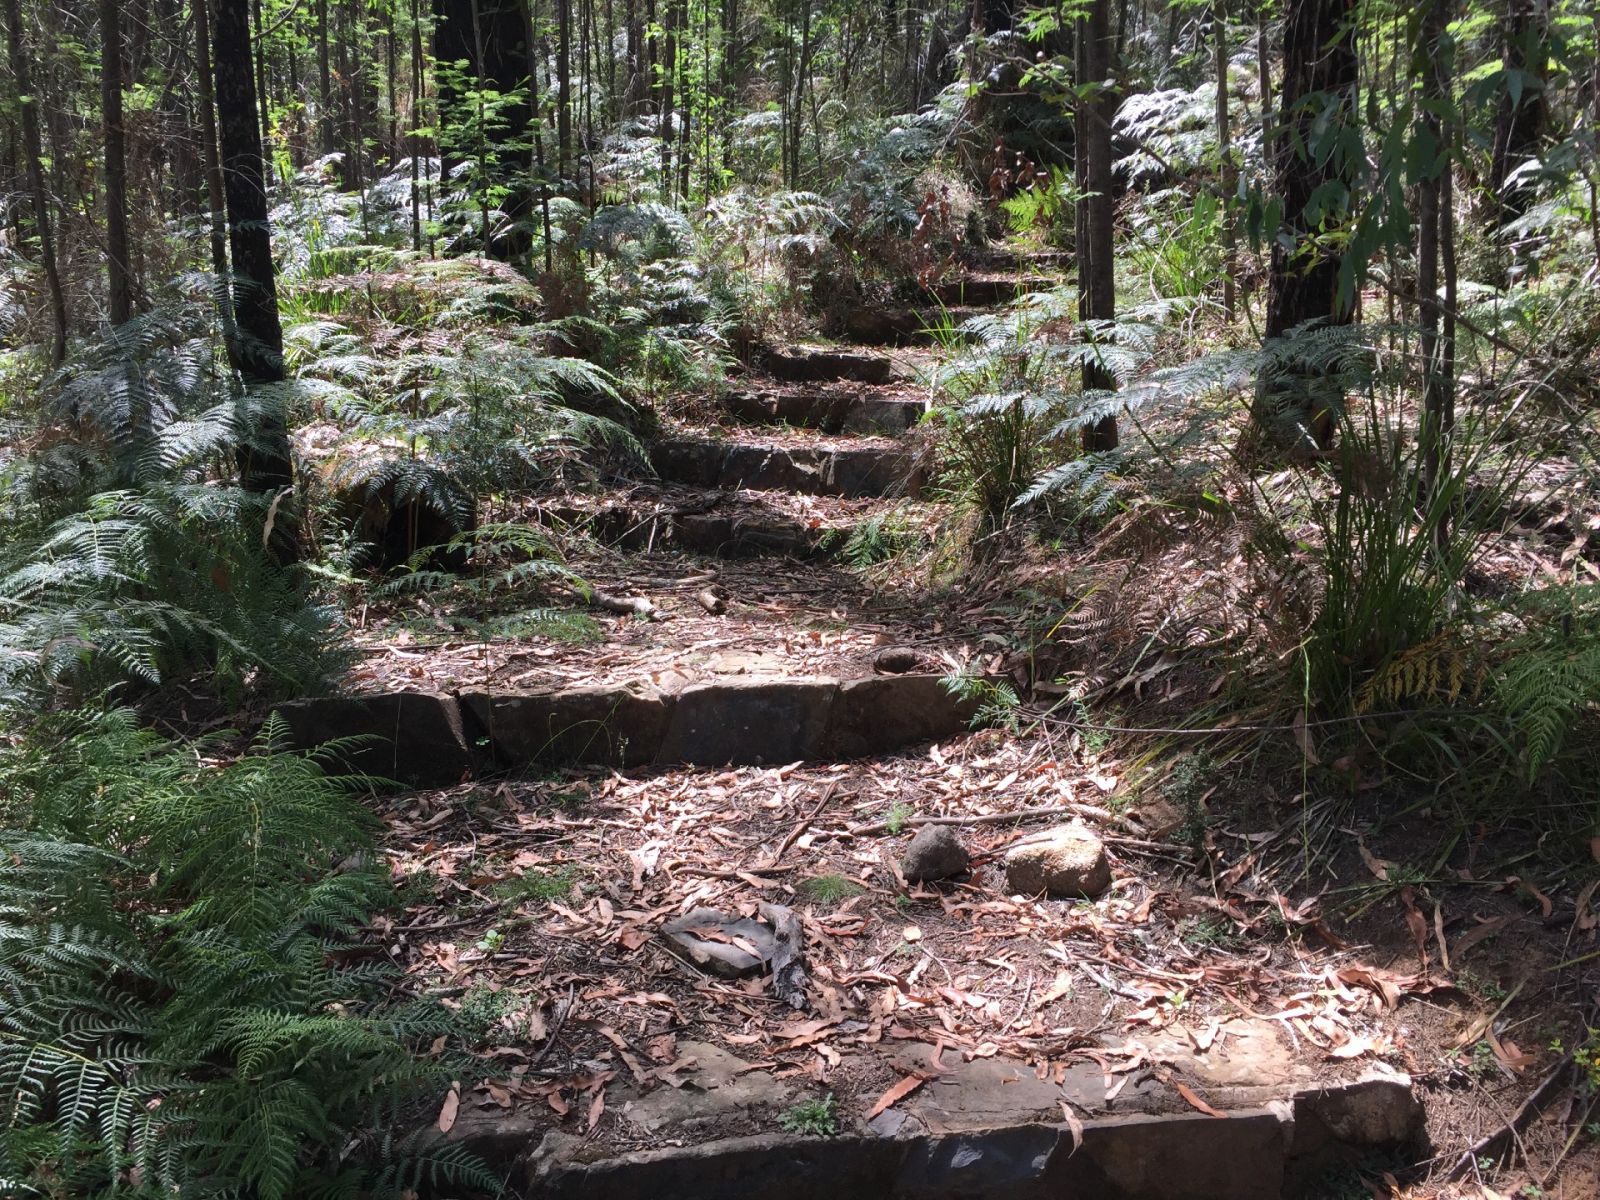 Low steps lead through ferns and a forest